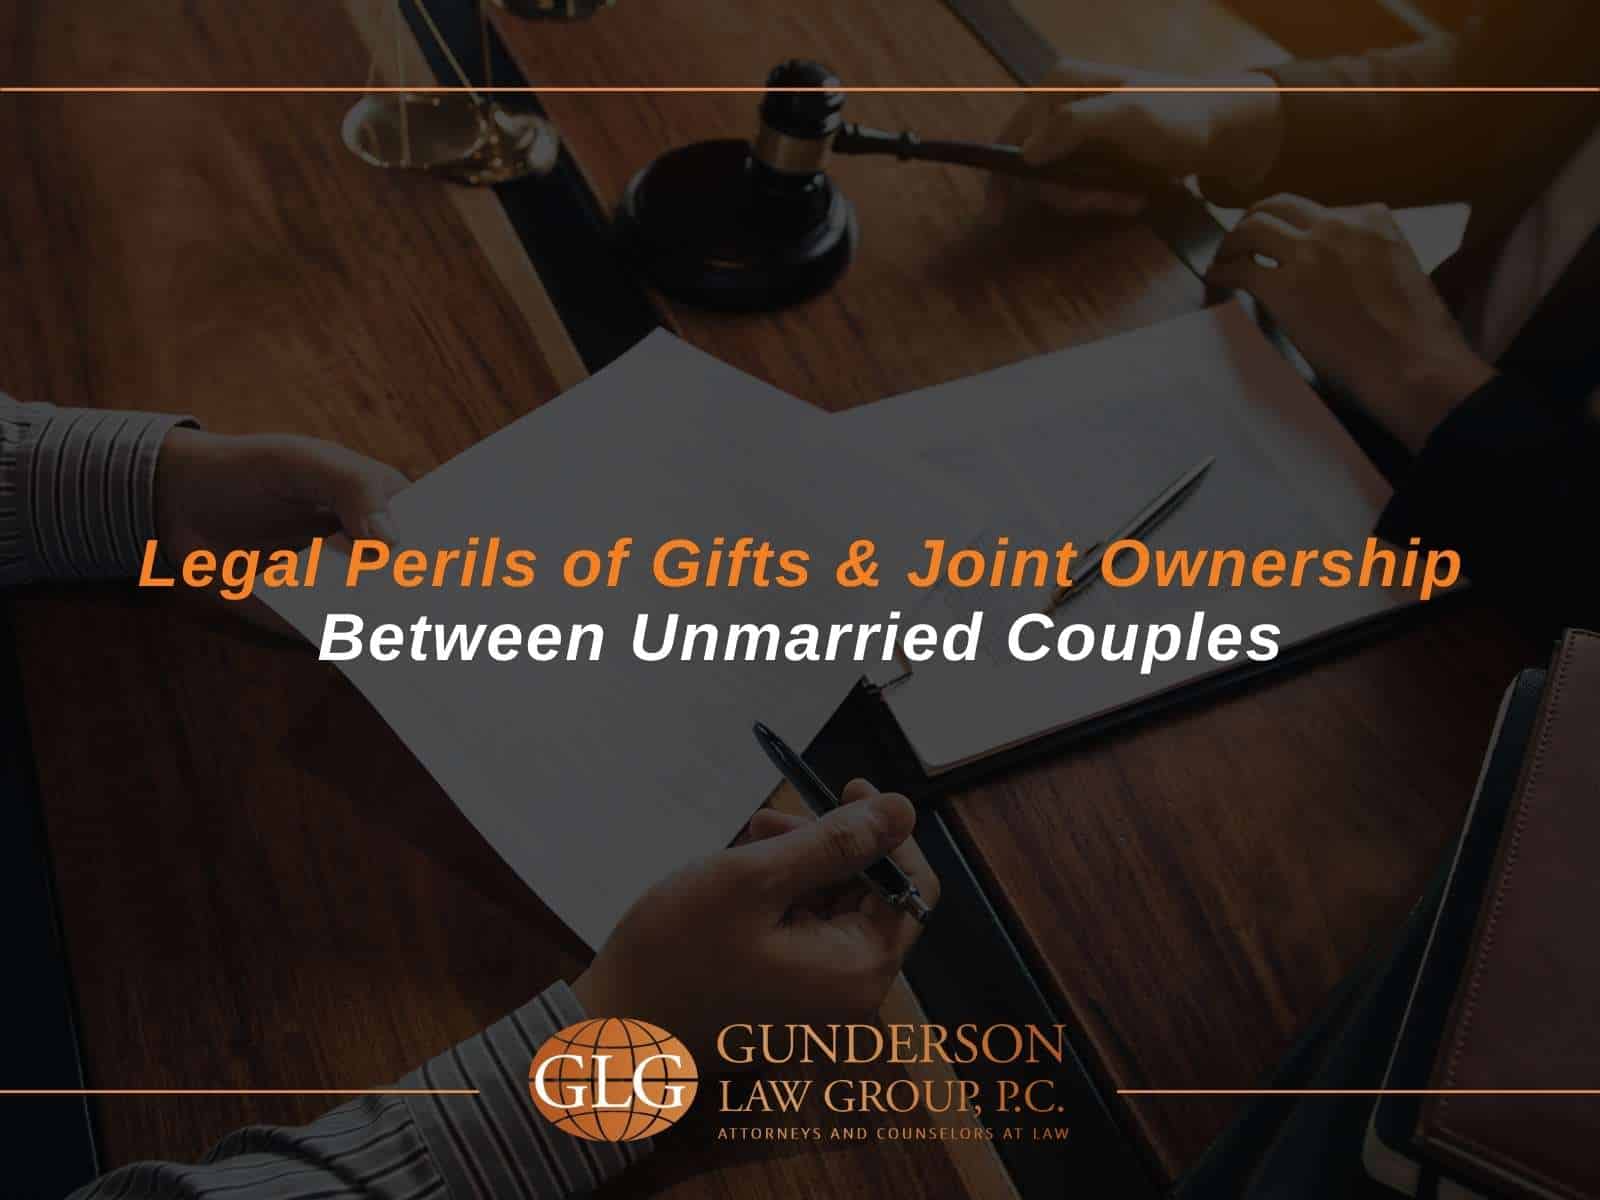 Legal Perils of Gifts & Joint Ownership Between Unmarried Couples